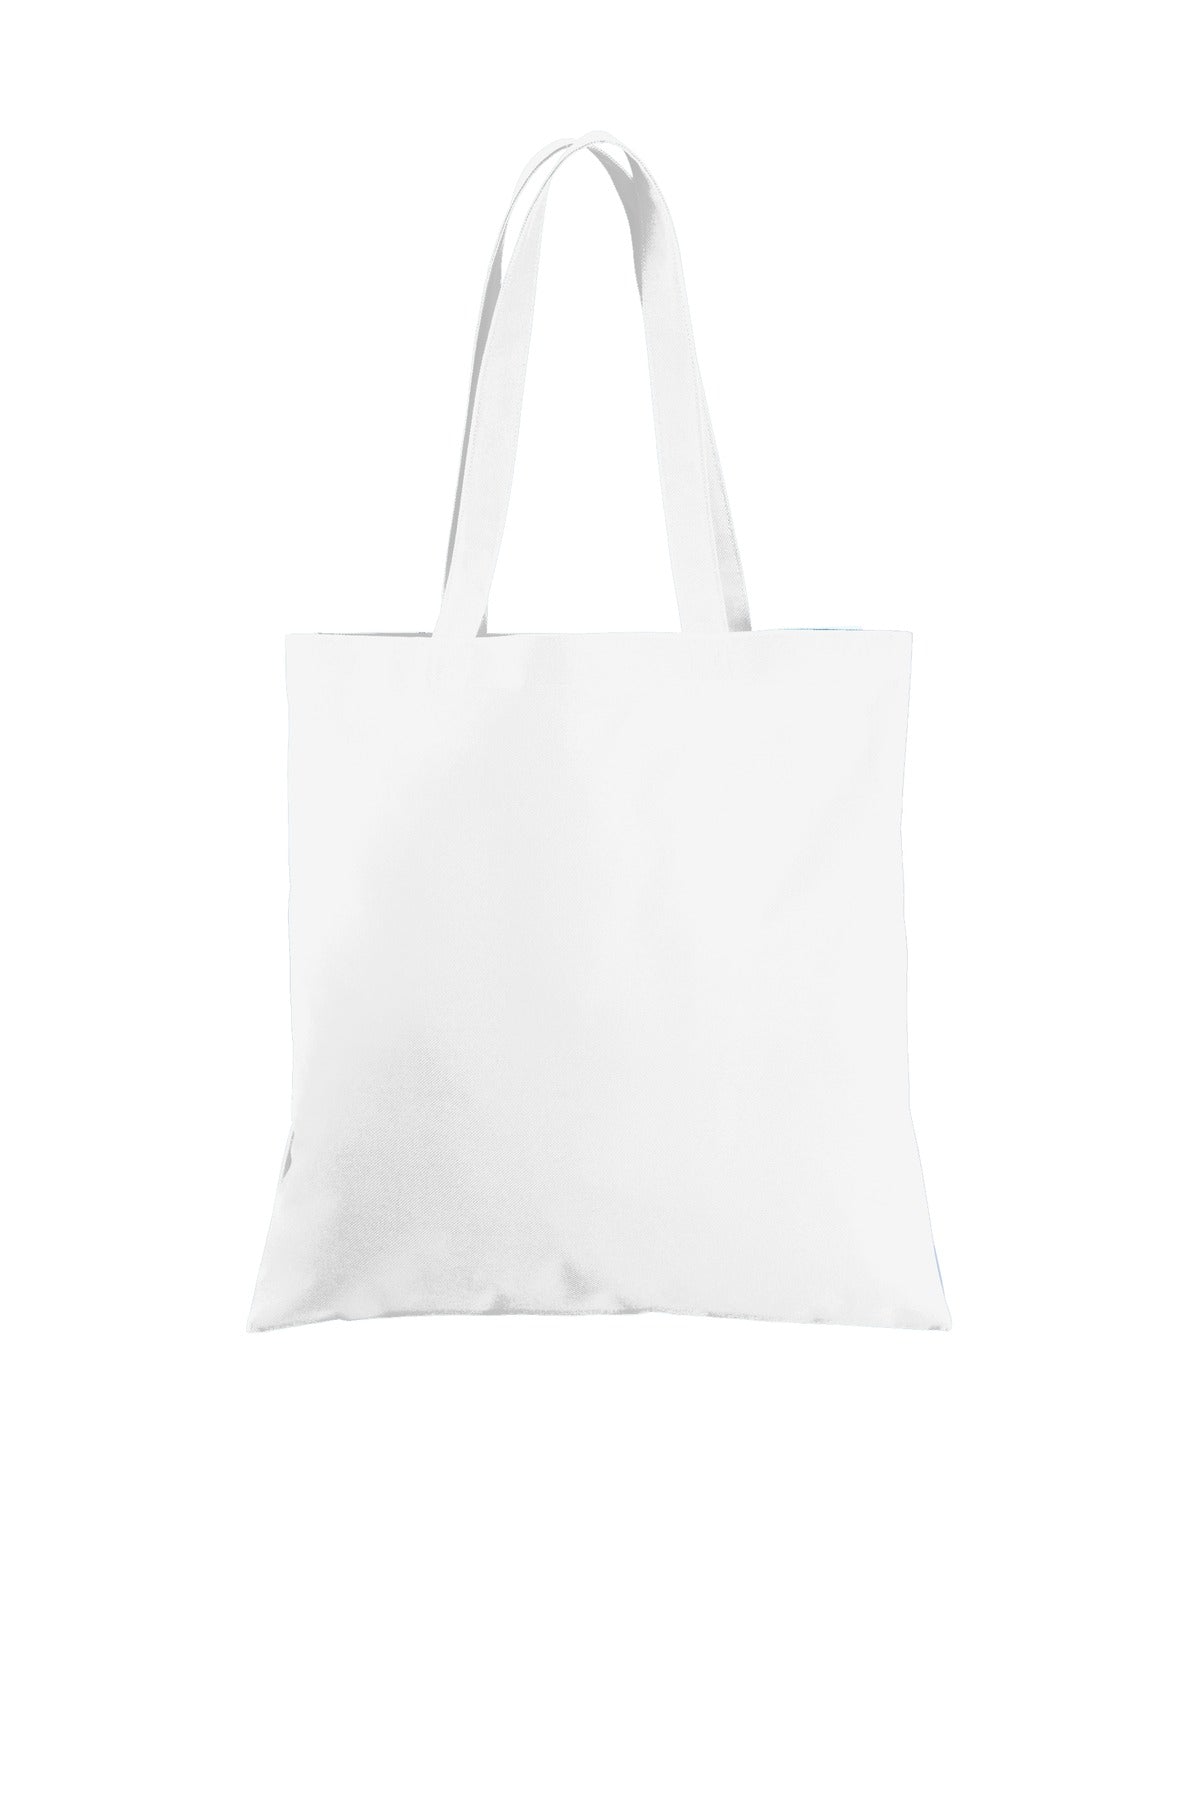 Photo of Port Authority Bags BG408  color  White